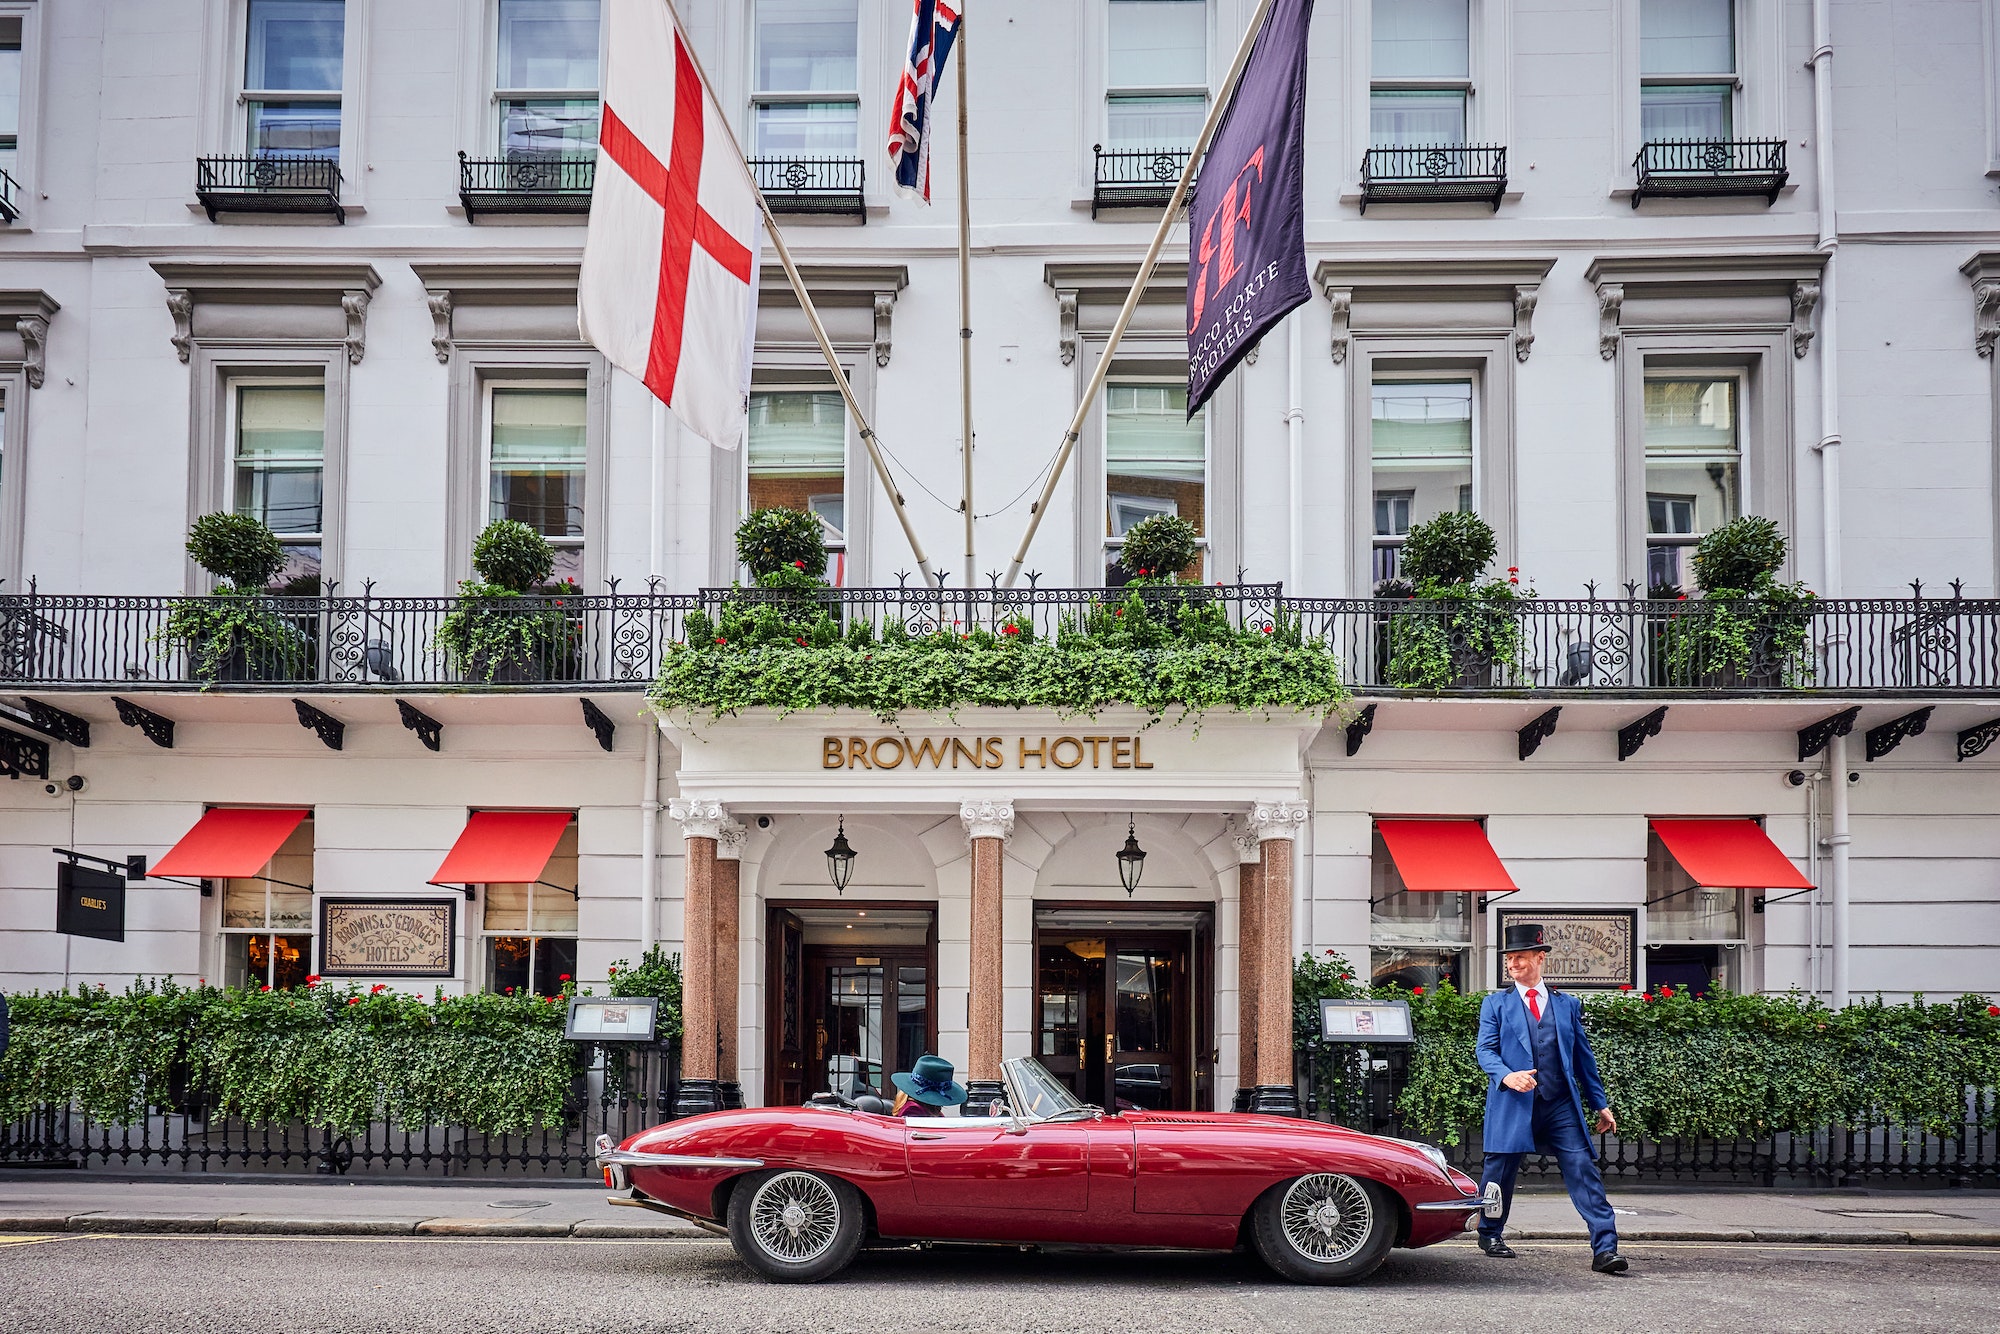 Red sports car arriving at Brown's Hotel, London, UK.